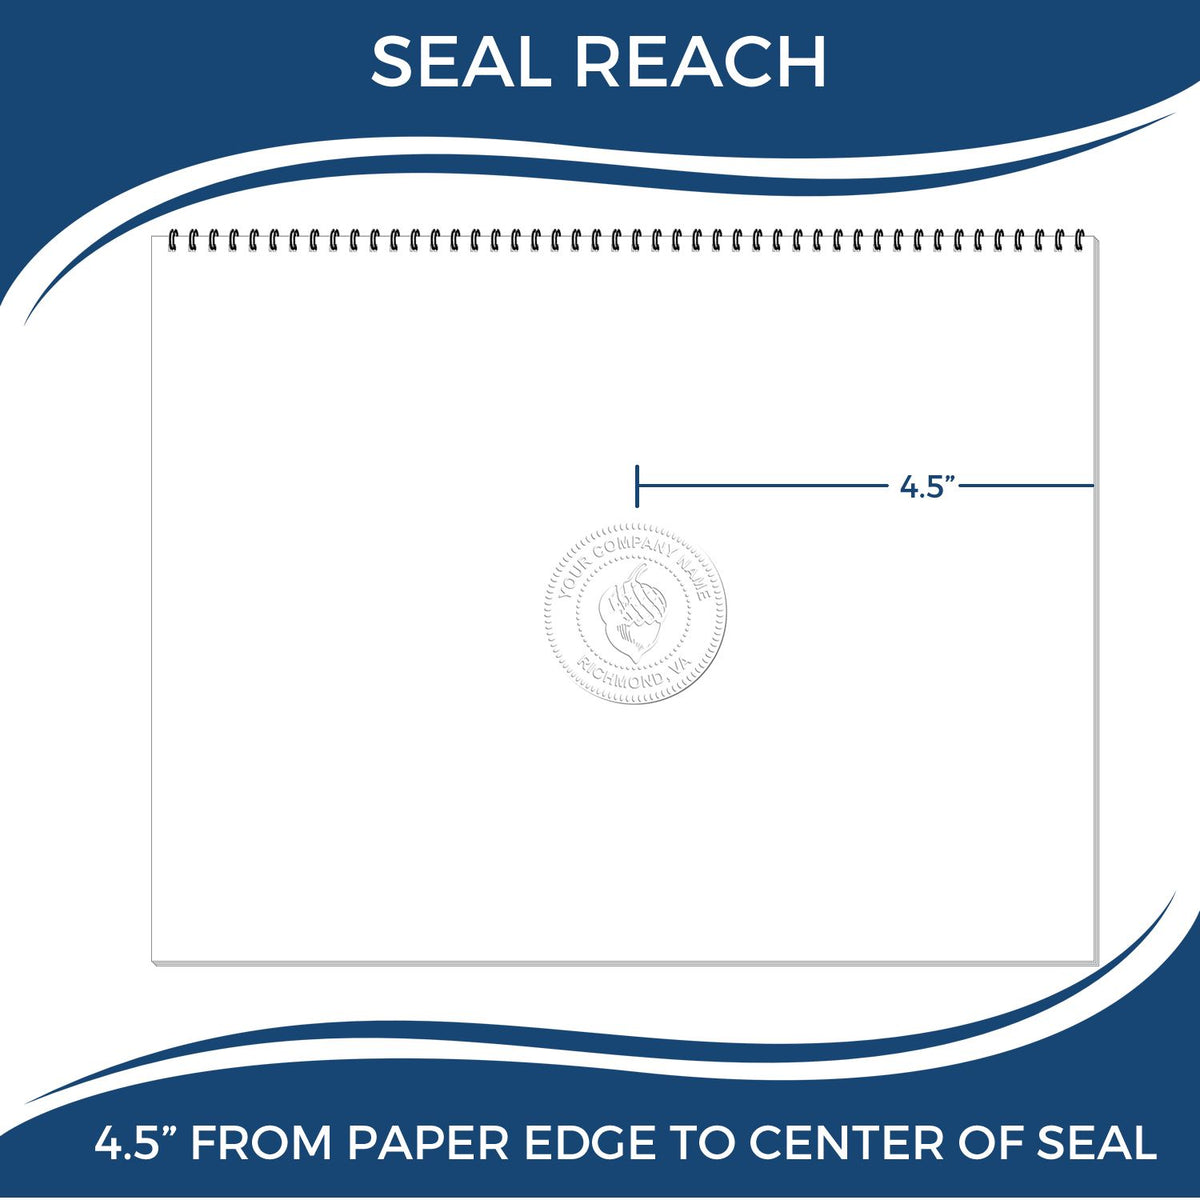 An infographic showing the seal reach which is represented by a ruler and a miniature seal image of the Extended Long Reach New Jersey Architect Seal Embosser